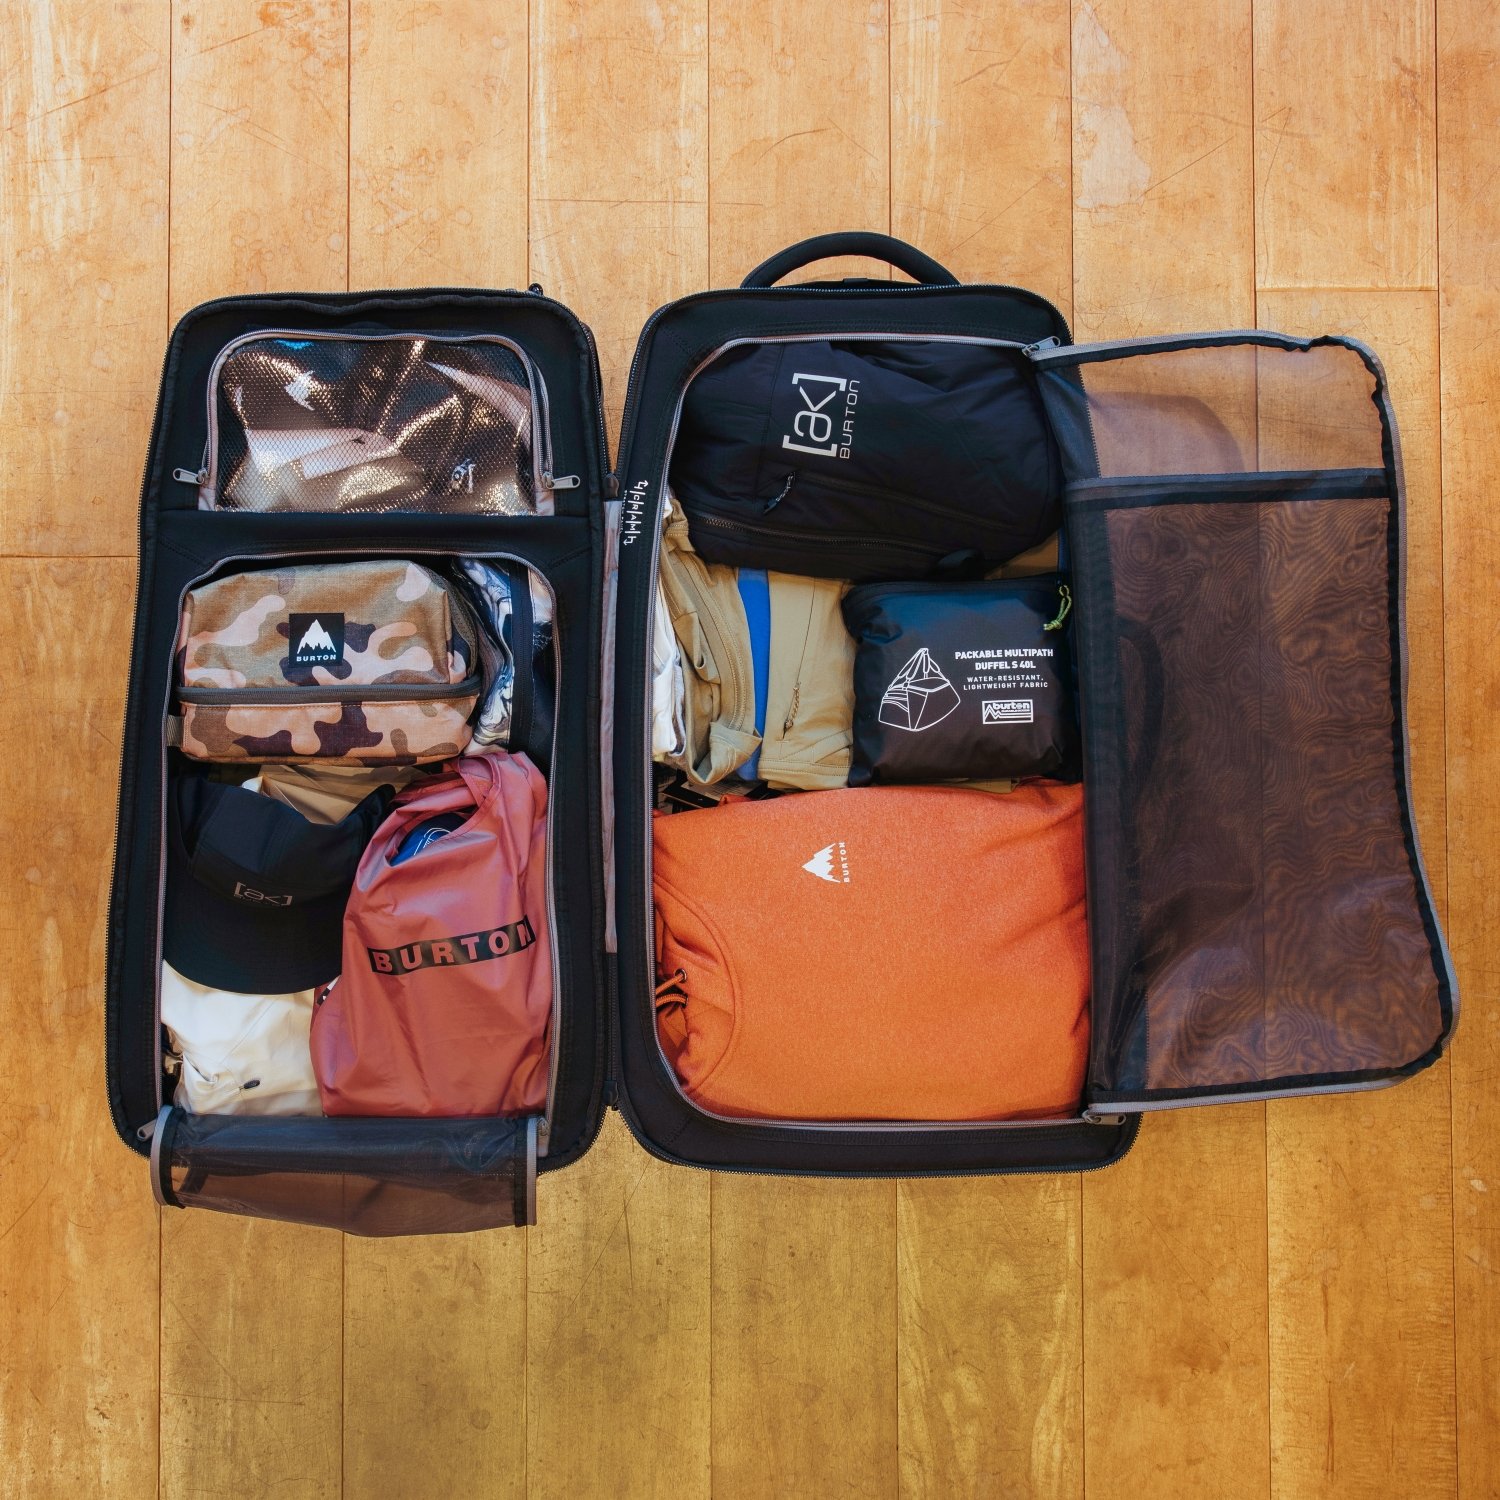 86L Packing image